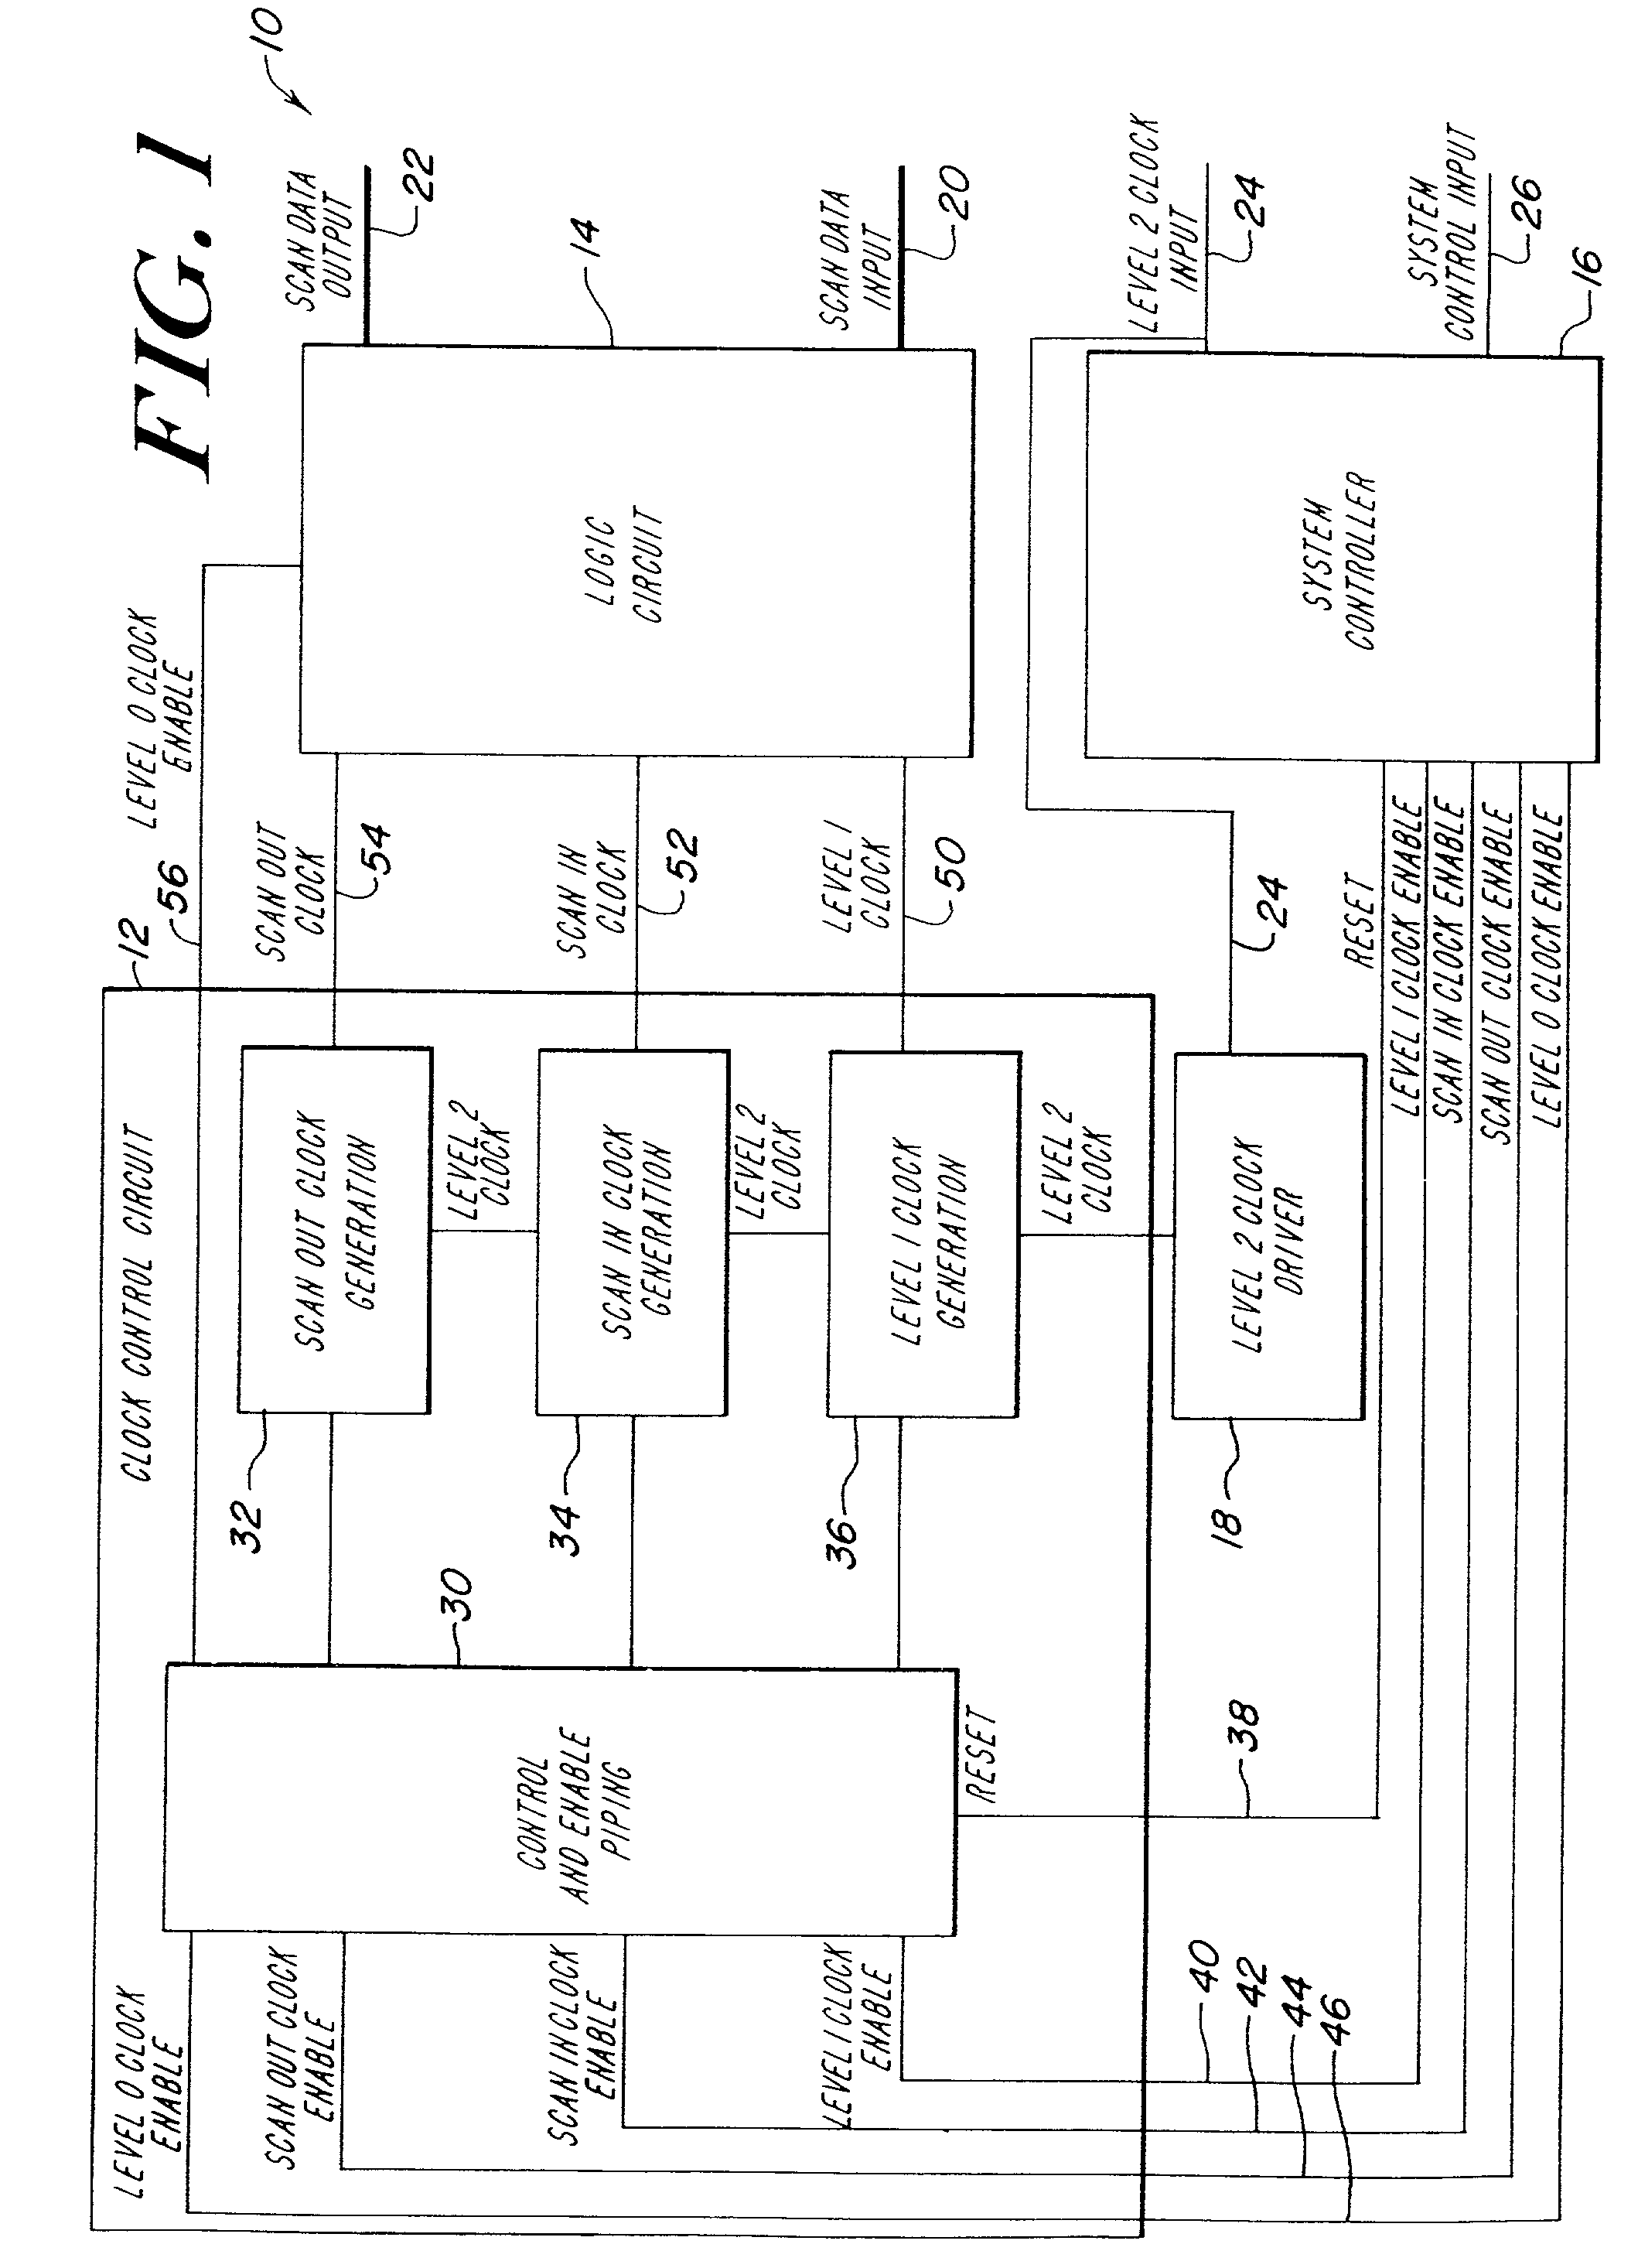 Method for scan testing and clocking dynamic domino circuits in VLSI systems using level sensitive latches and edge triggered flip flops